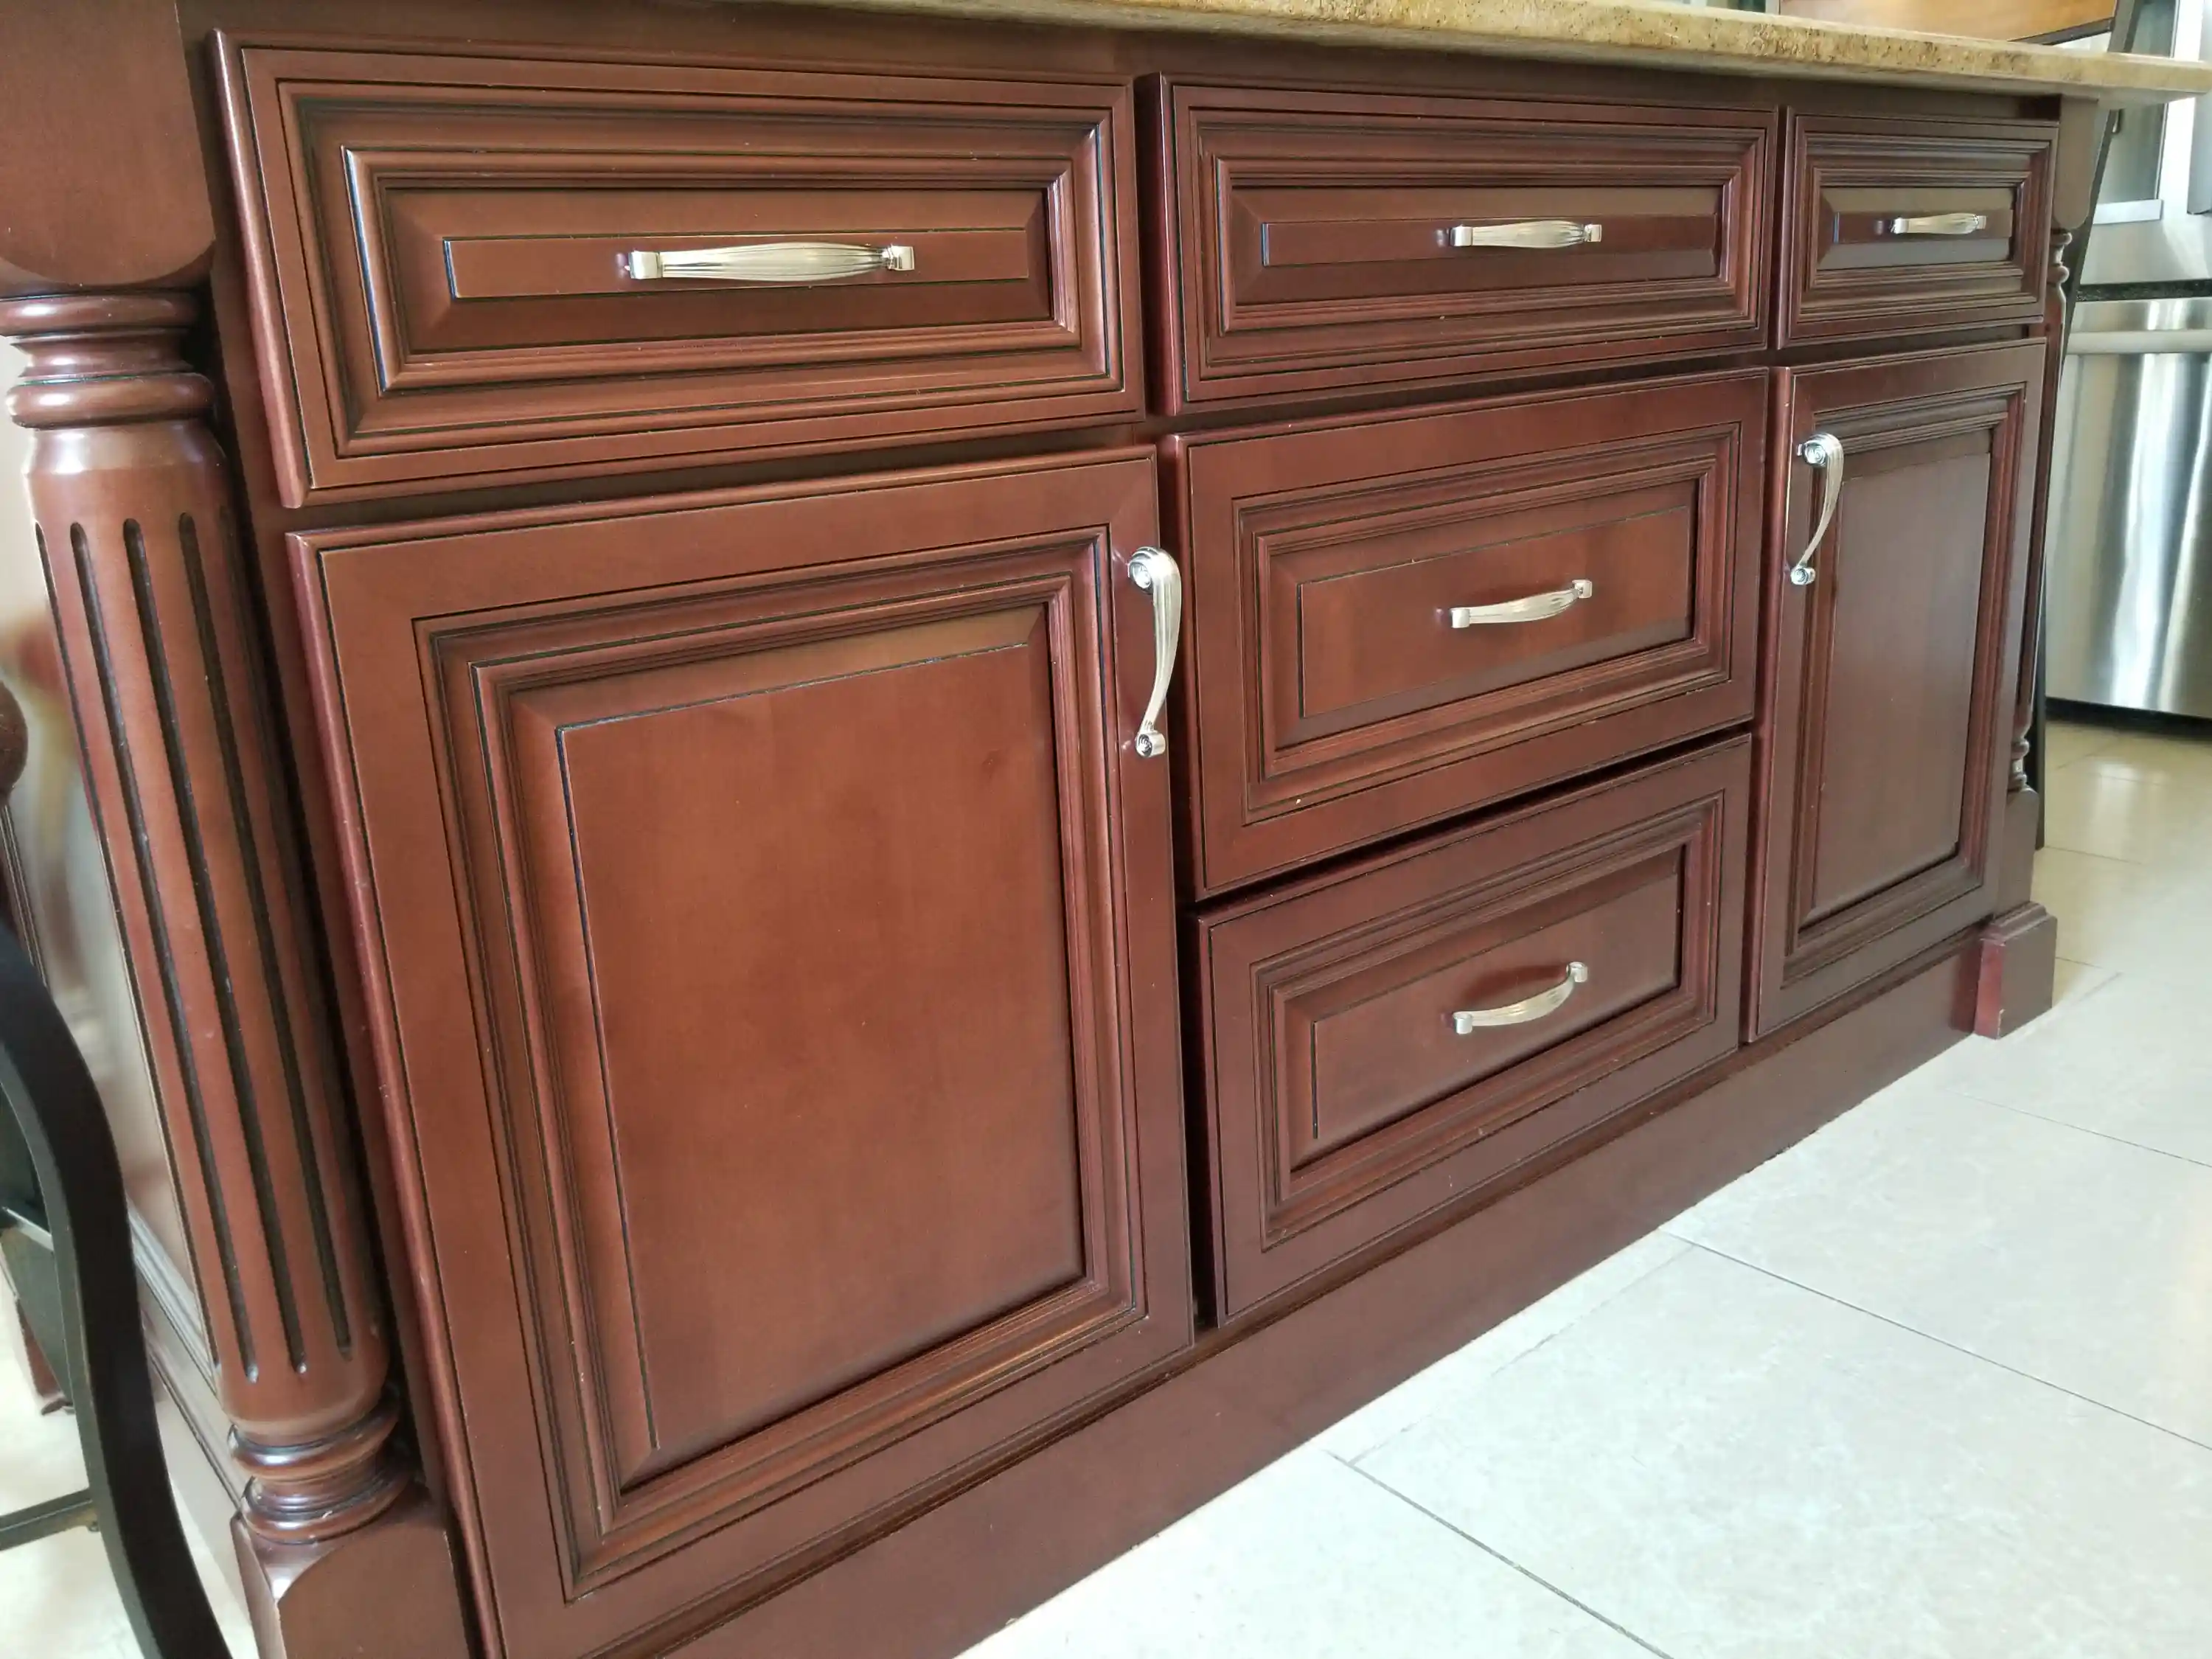 Knoxville brown kitchen cabinets.